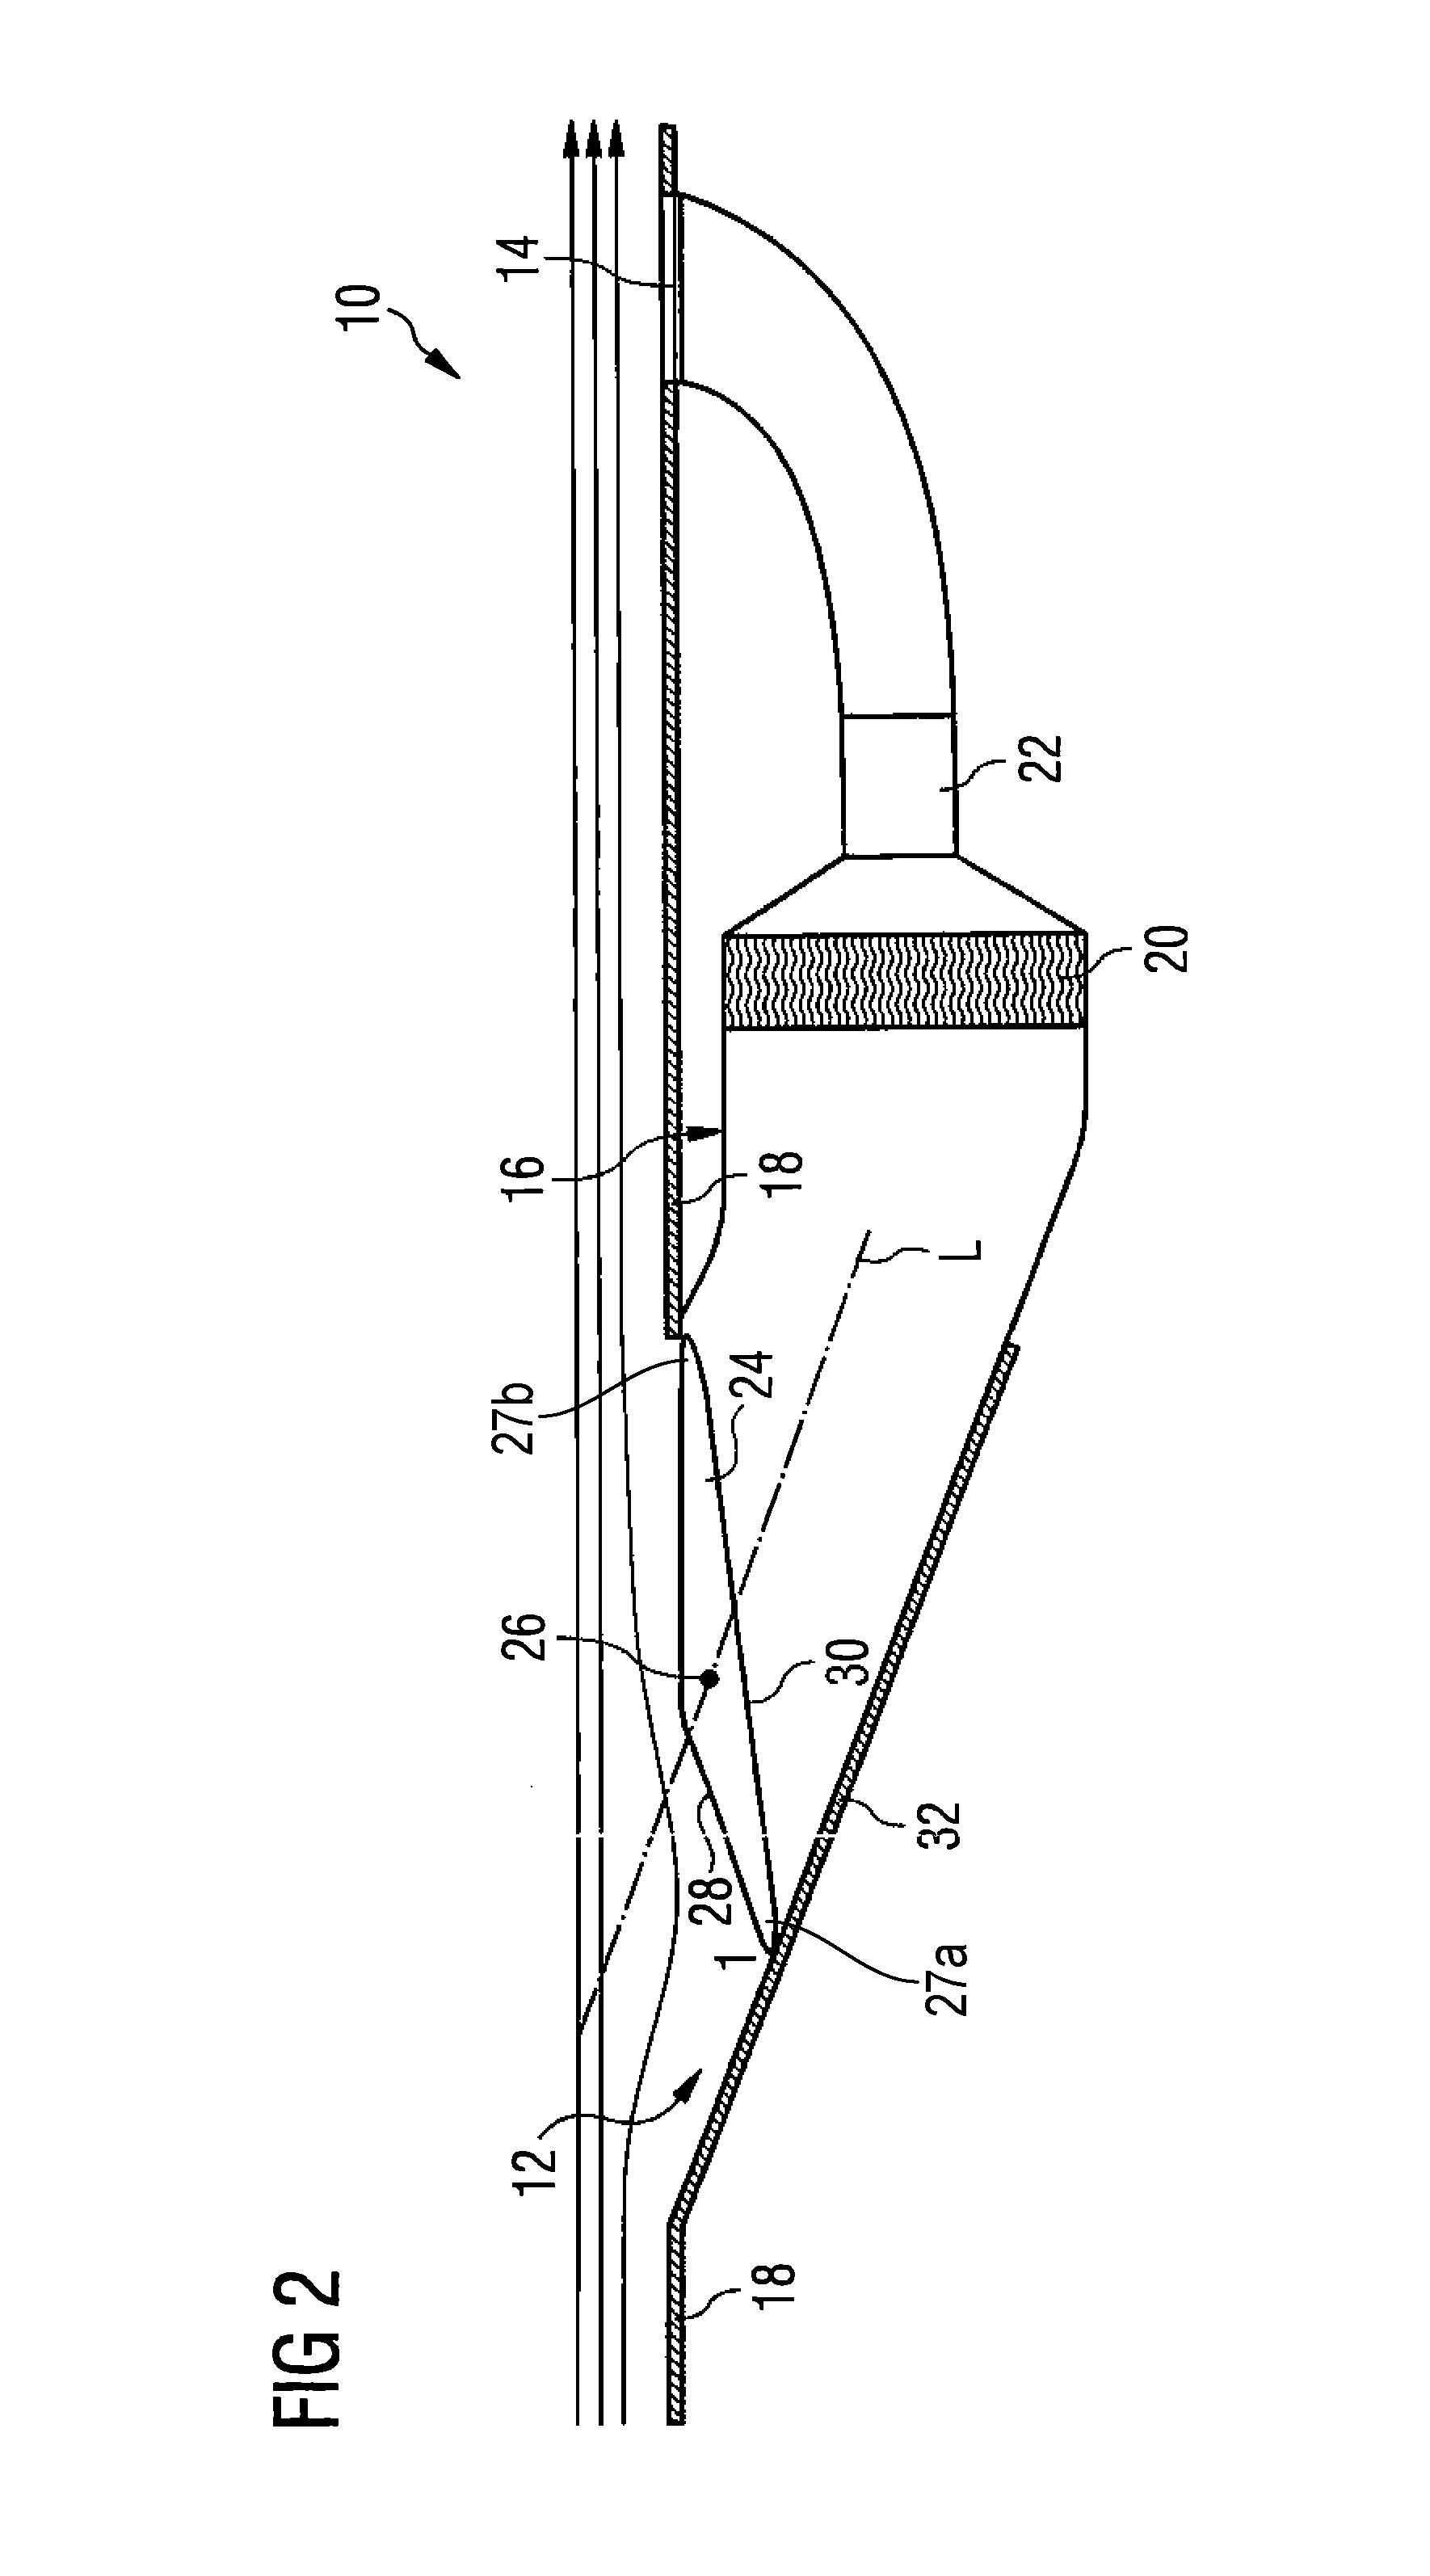 Air duct for supplying ambient air in an aircraft